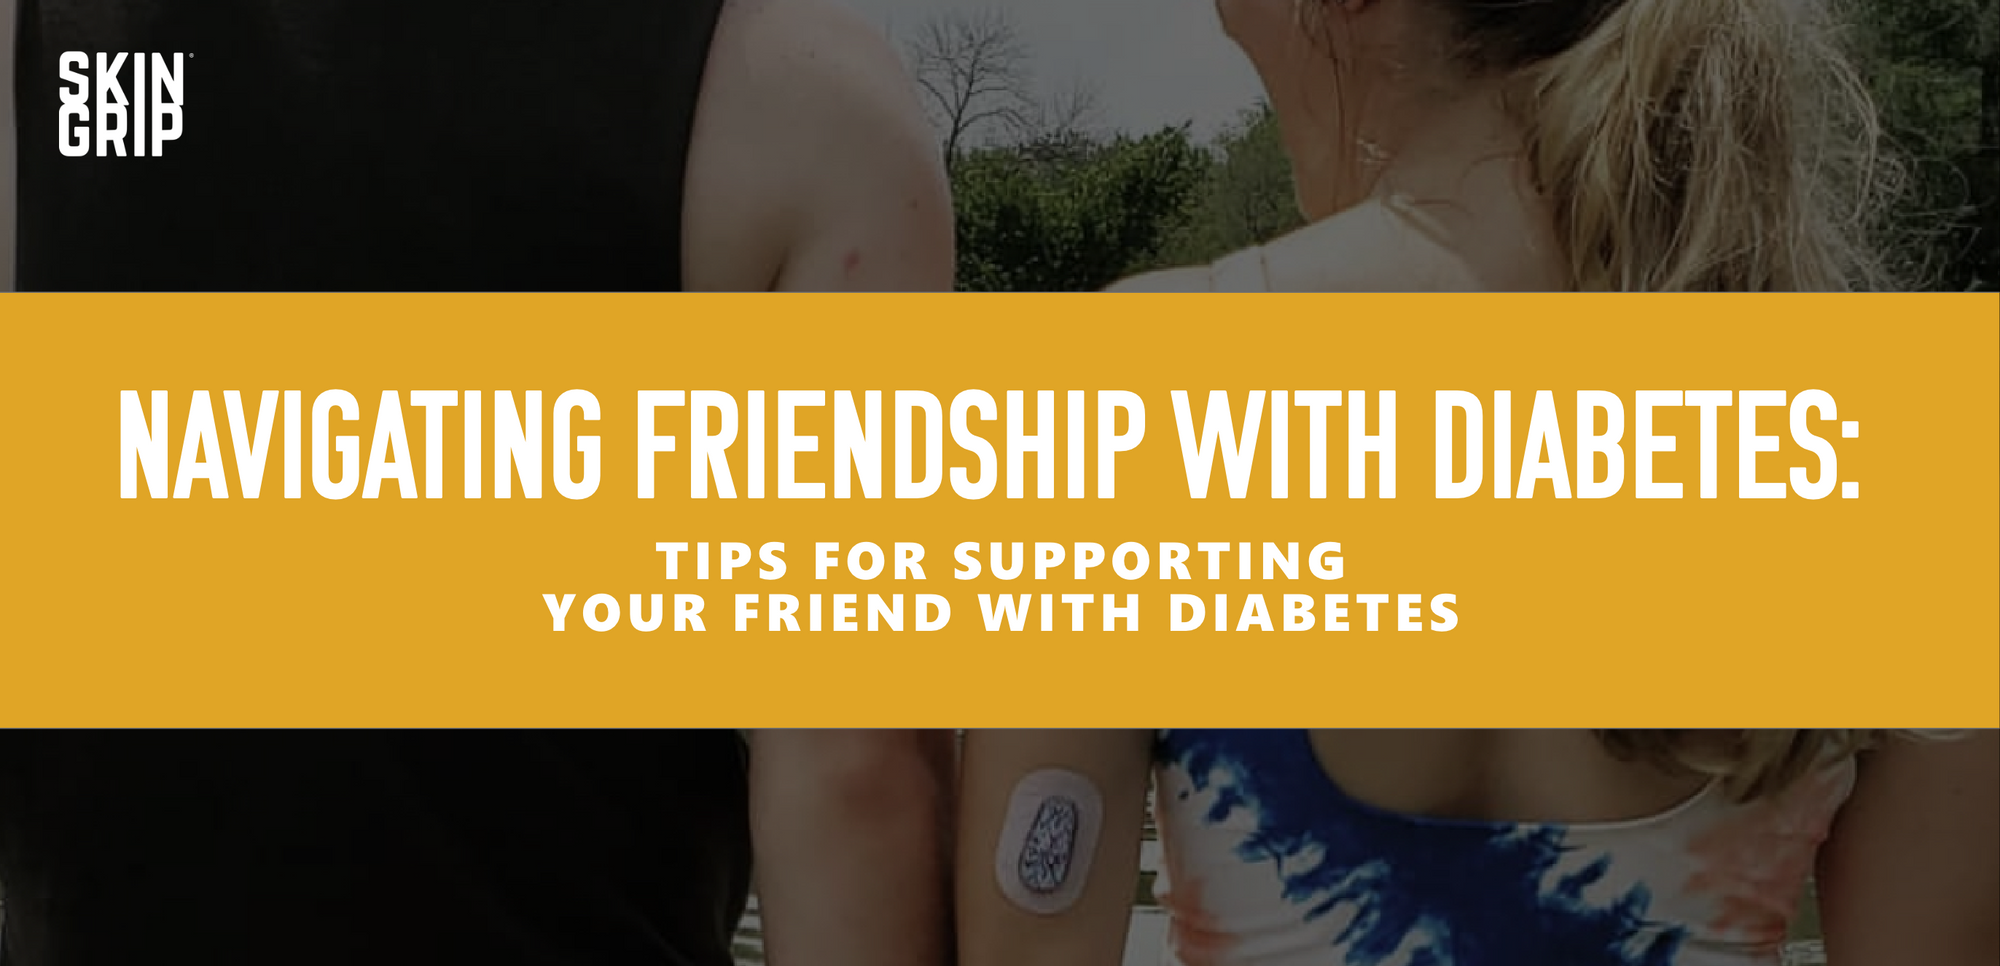 Navigating Friendship With Diabetes: Tips for Supporting Your Friend With Diabetes